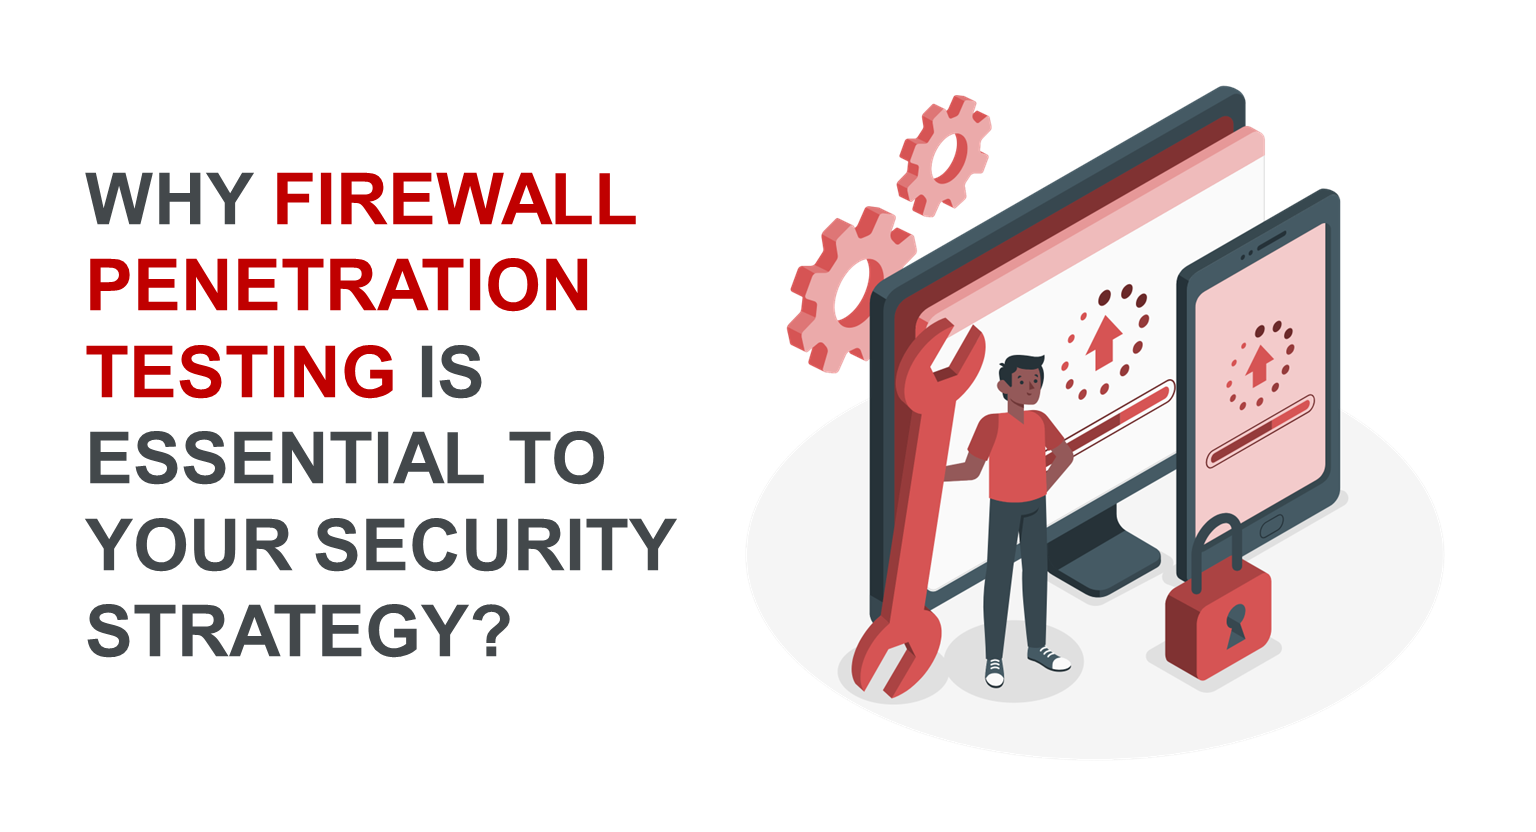 Why Firewall Penetration Testing is Essential to Your Security Strategy 